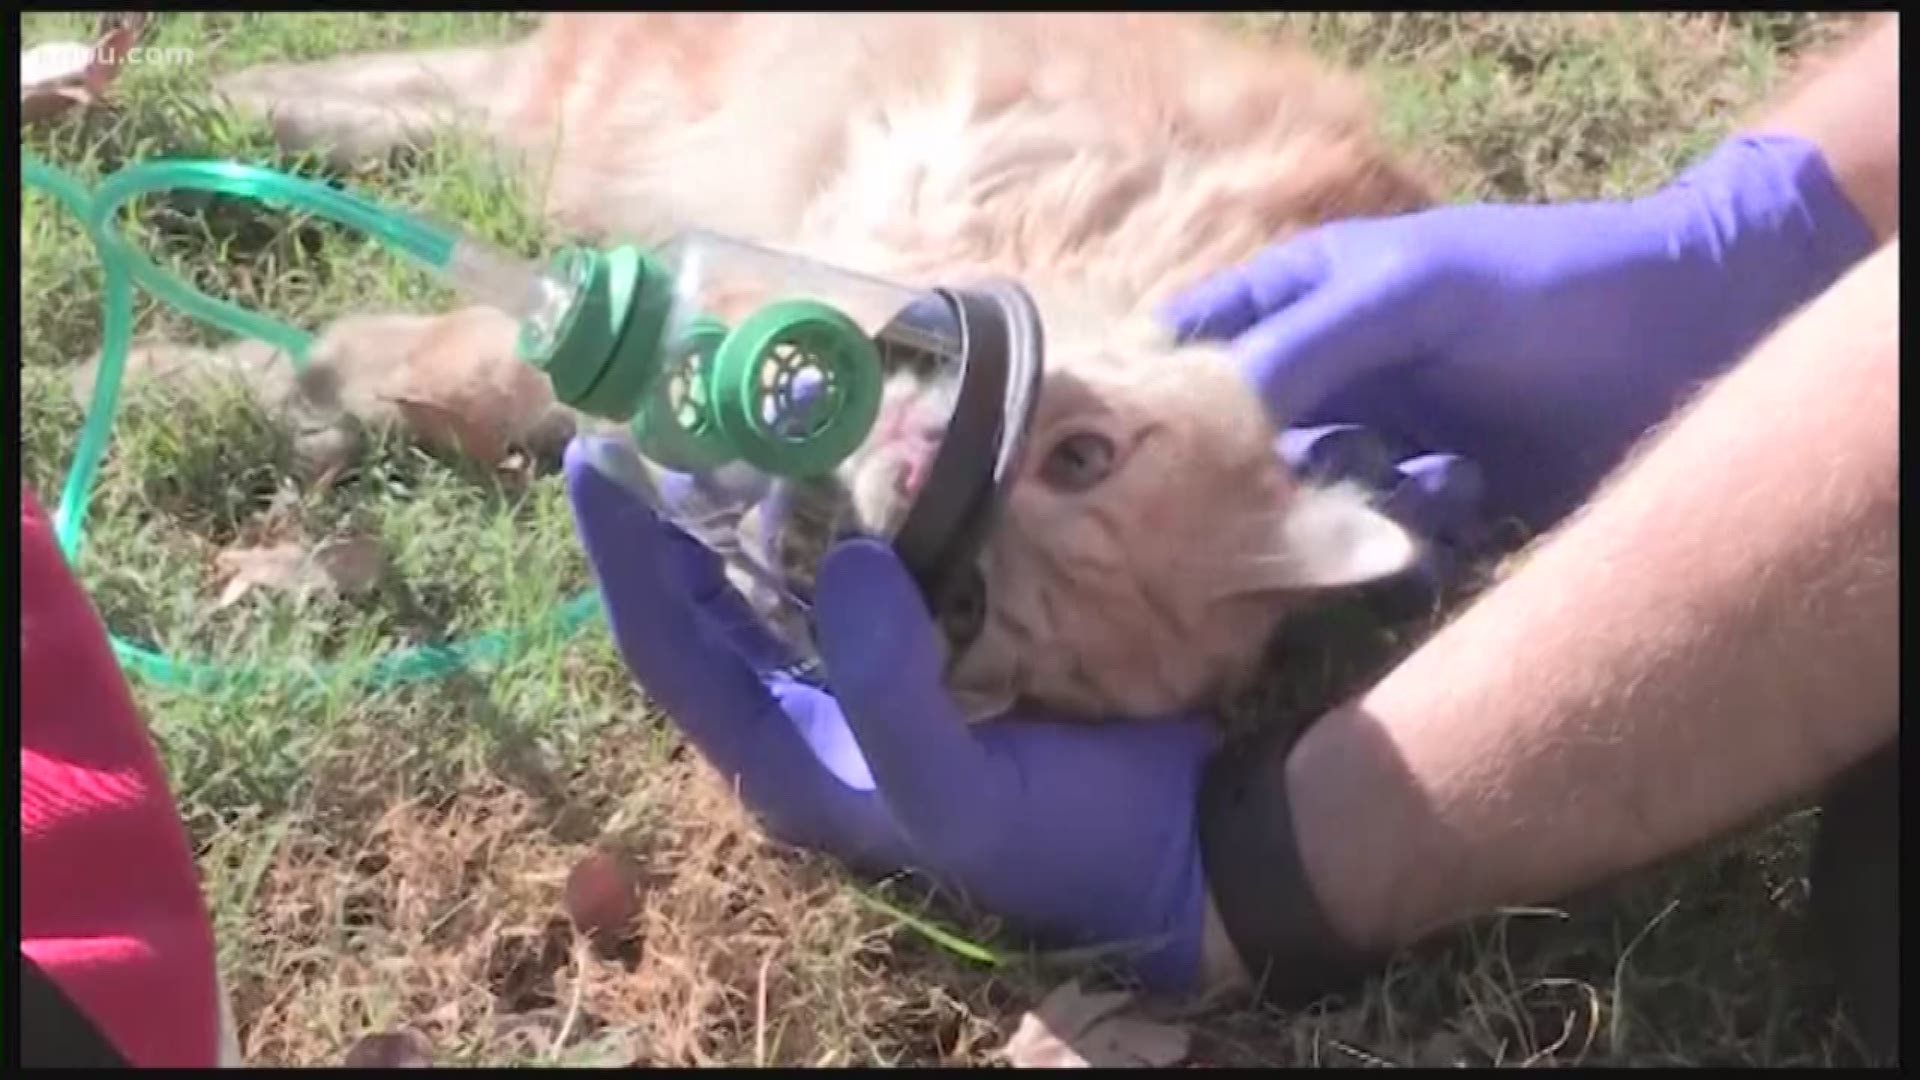 Houston firefighters saved two cats from an apartment fire in Spring. One of the cats was found unresponsive but firefighters were able to bring the cat back to life